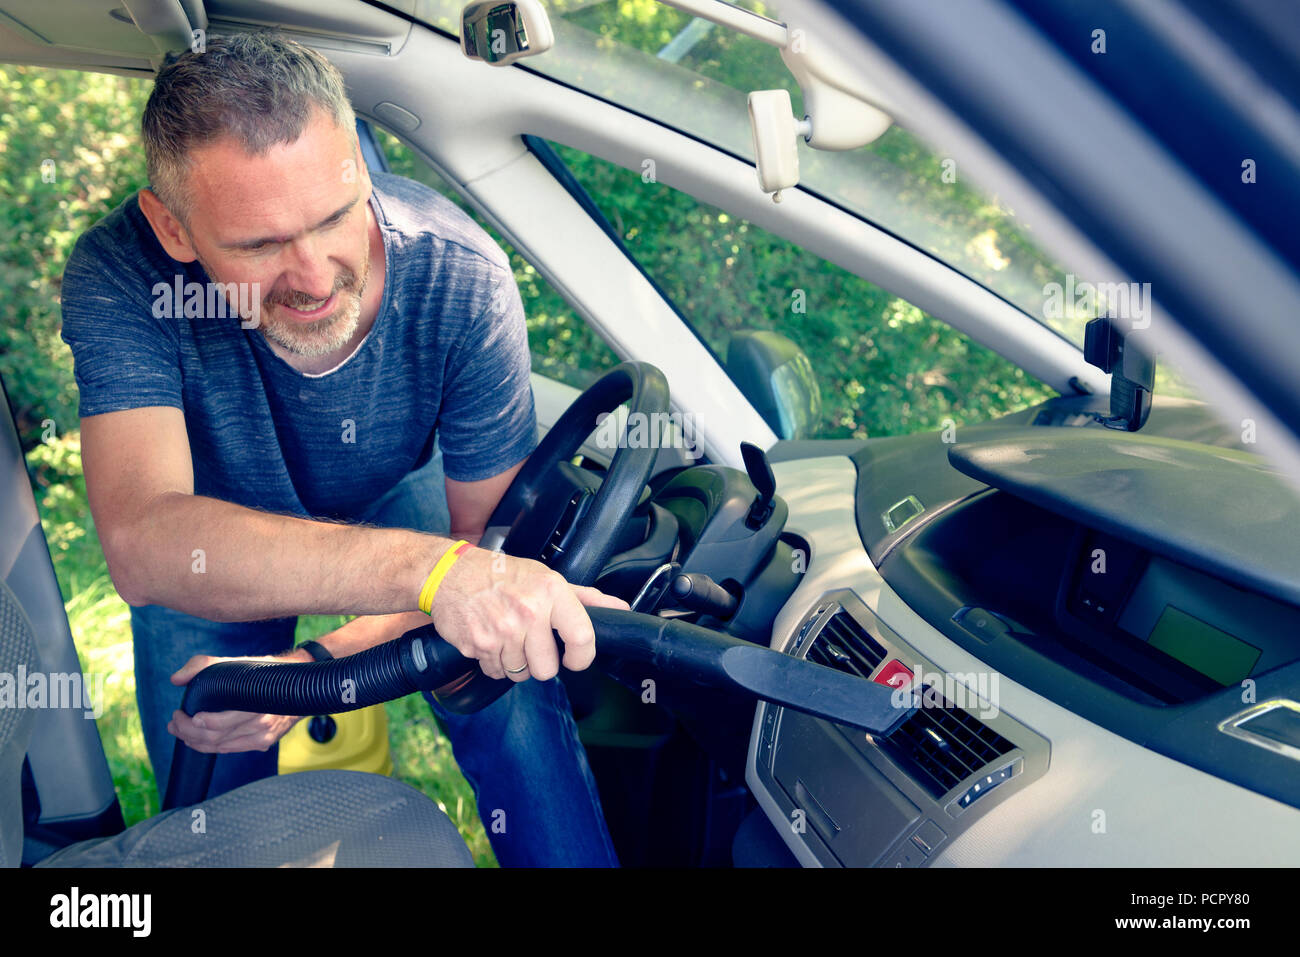 Man hoovering a air vents inside a car cabin, Stock Photo